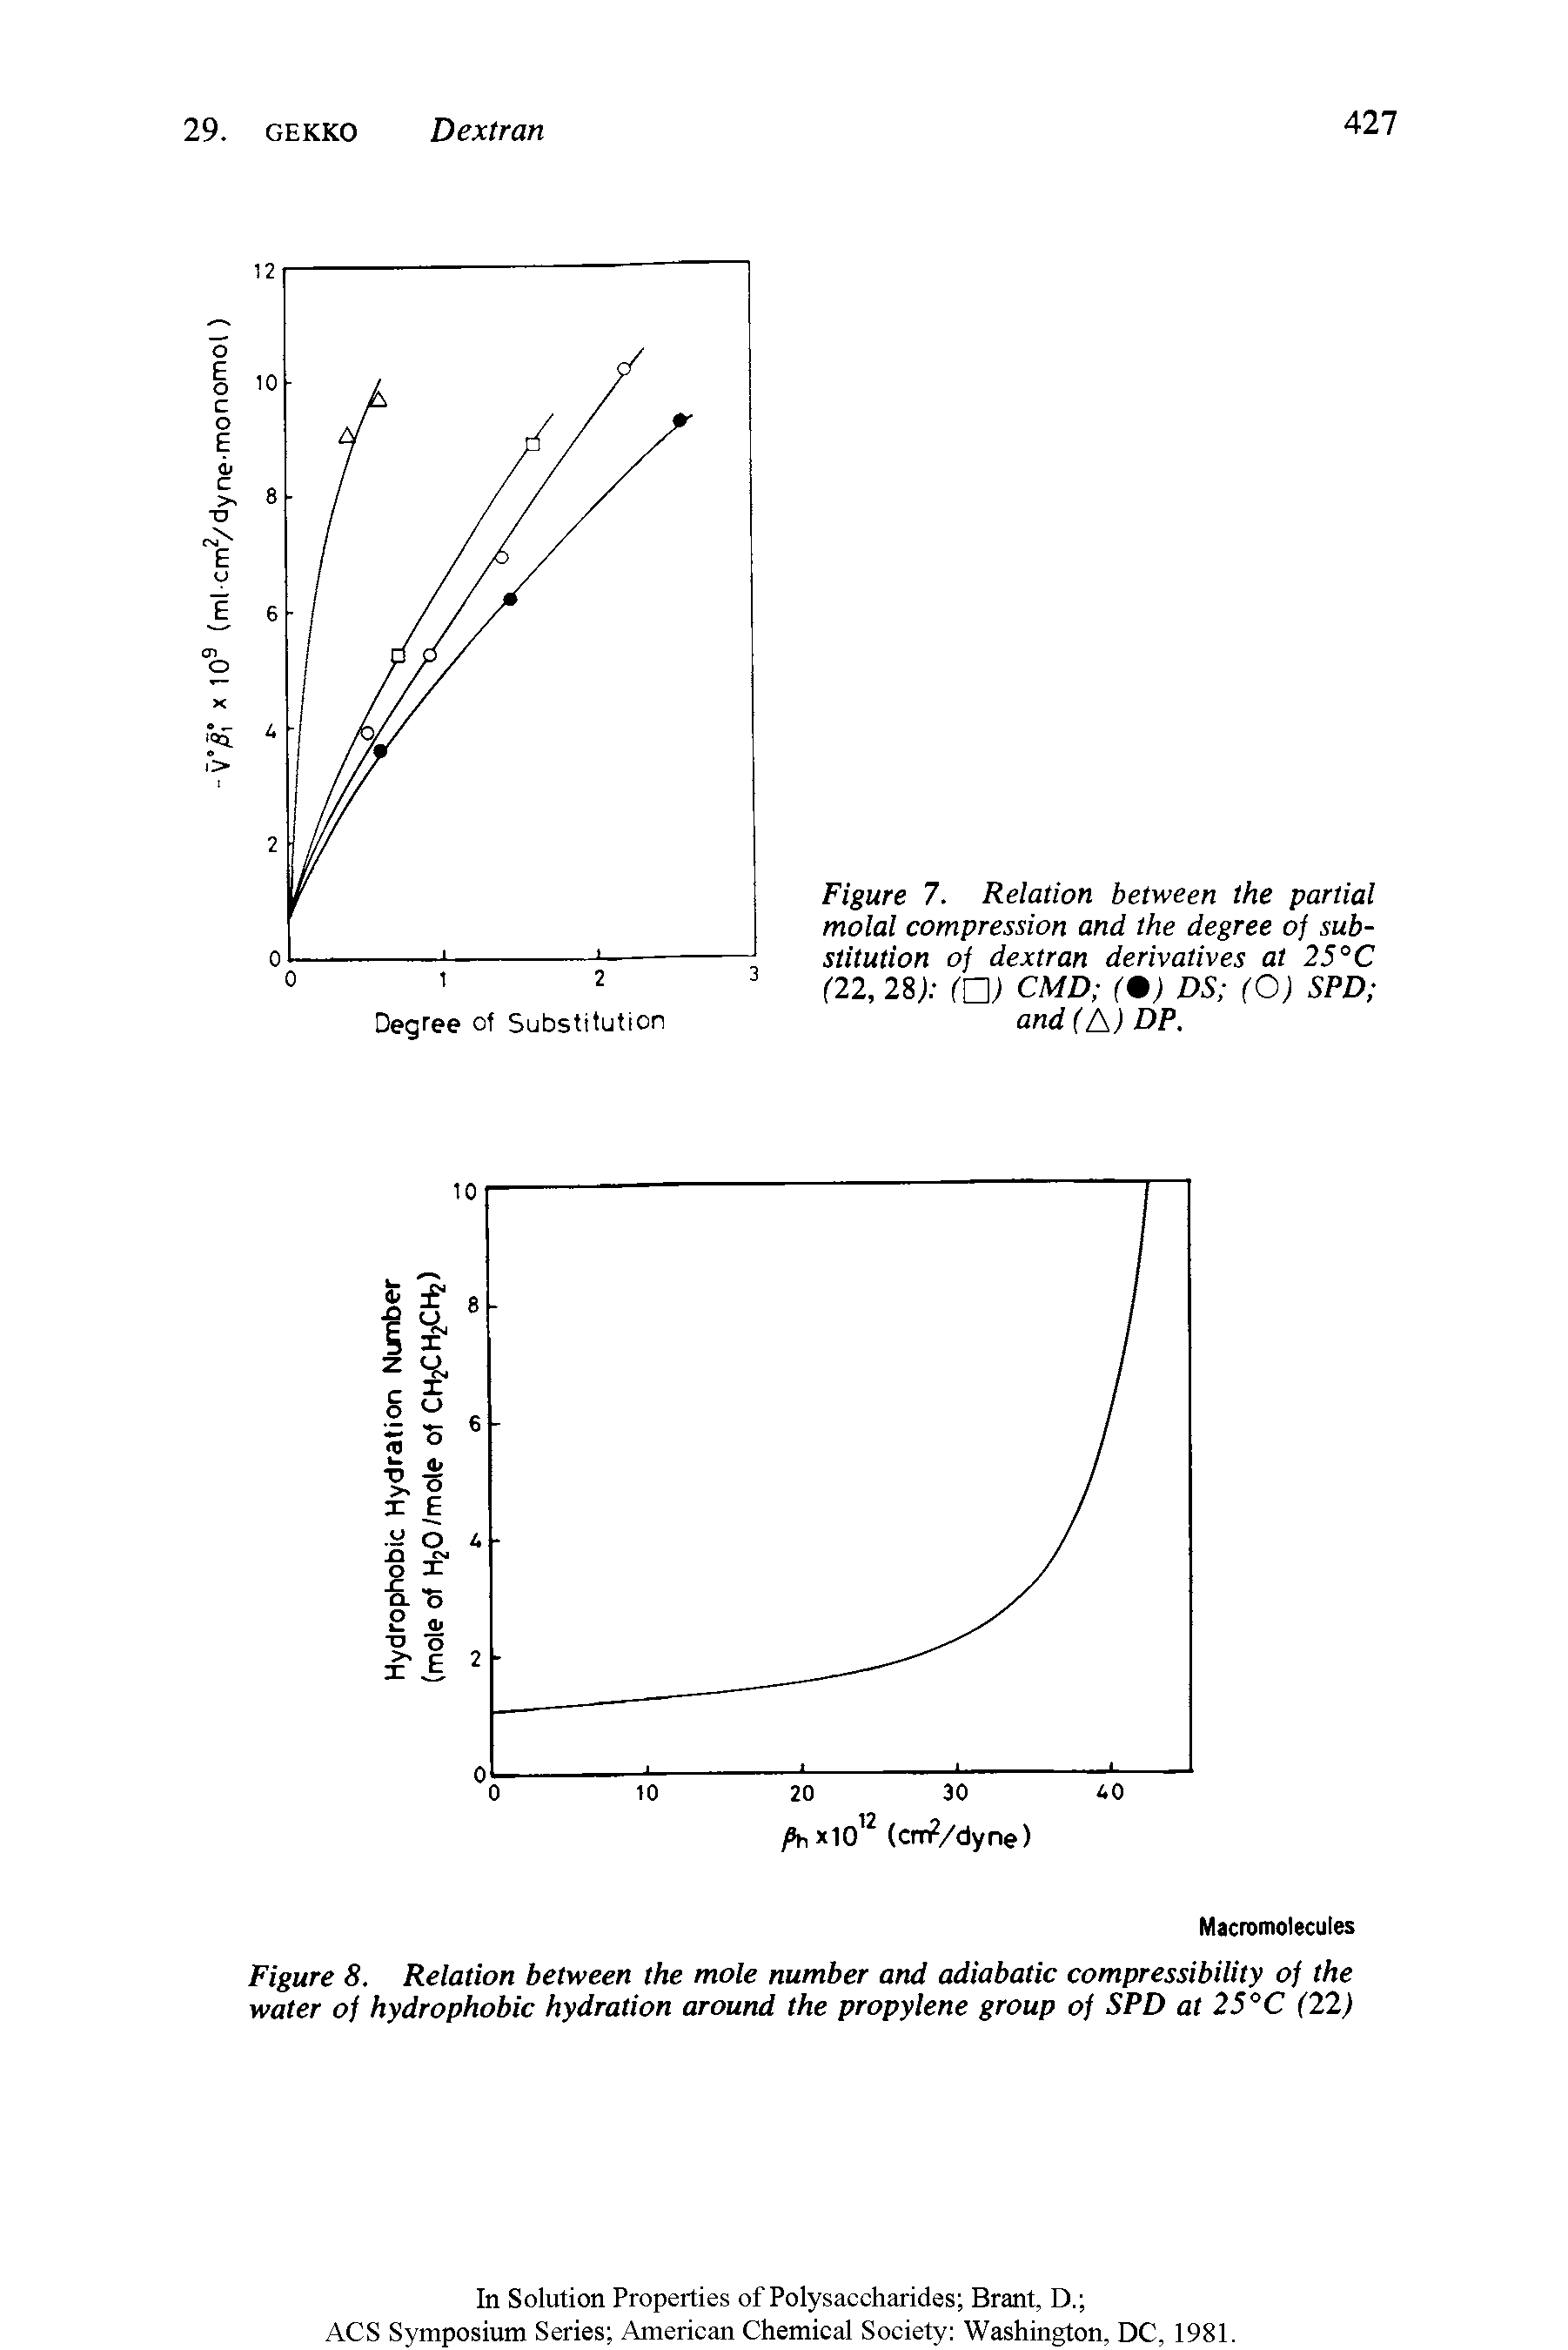 Figure 7. Relation between the partial molal compression and the degree of substitution of dextran derivatives at 25°C (22, 2%) (U) CMD (%) DS (O) SPD and (A) DP.